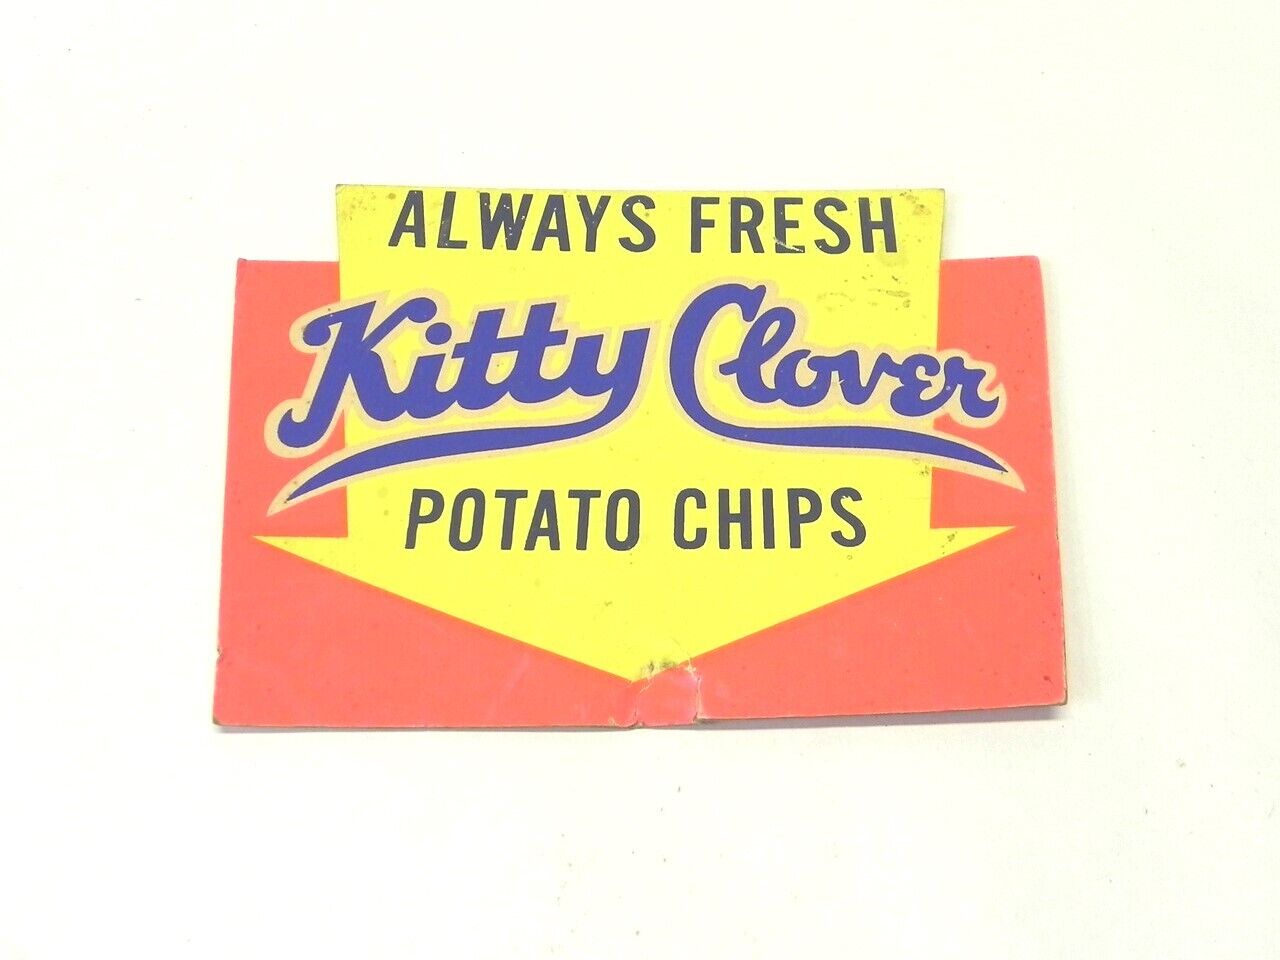 VINTAGE 1930'S-1950'S KITTY CLOVER POTATO CHIPS ALWAYS FRESH SIGN PRE-OWNED 